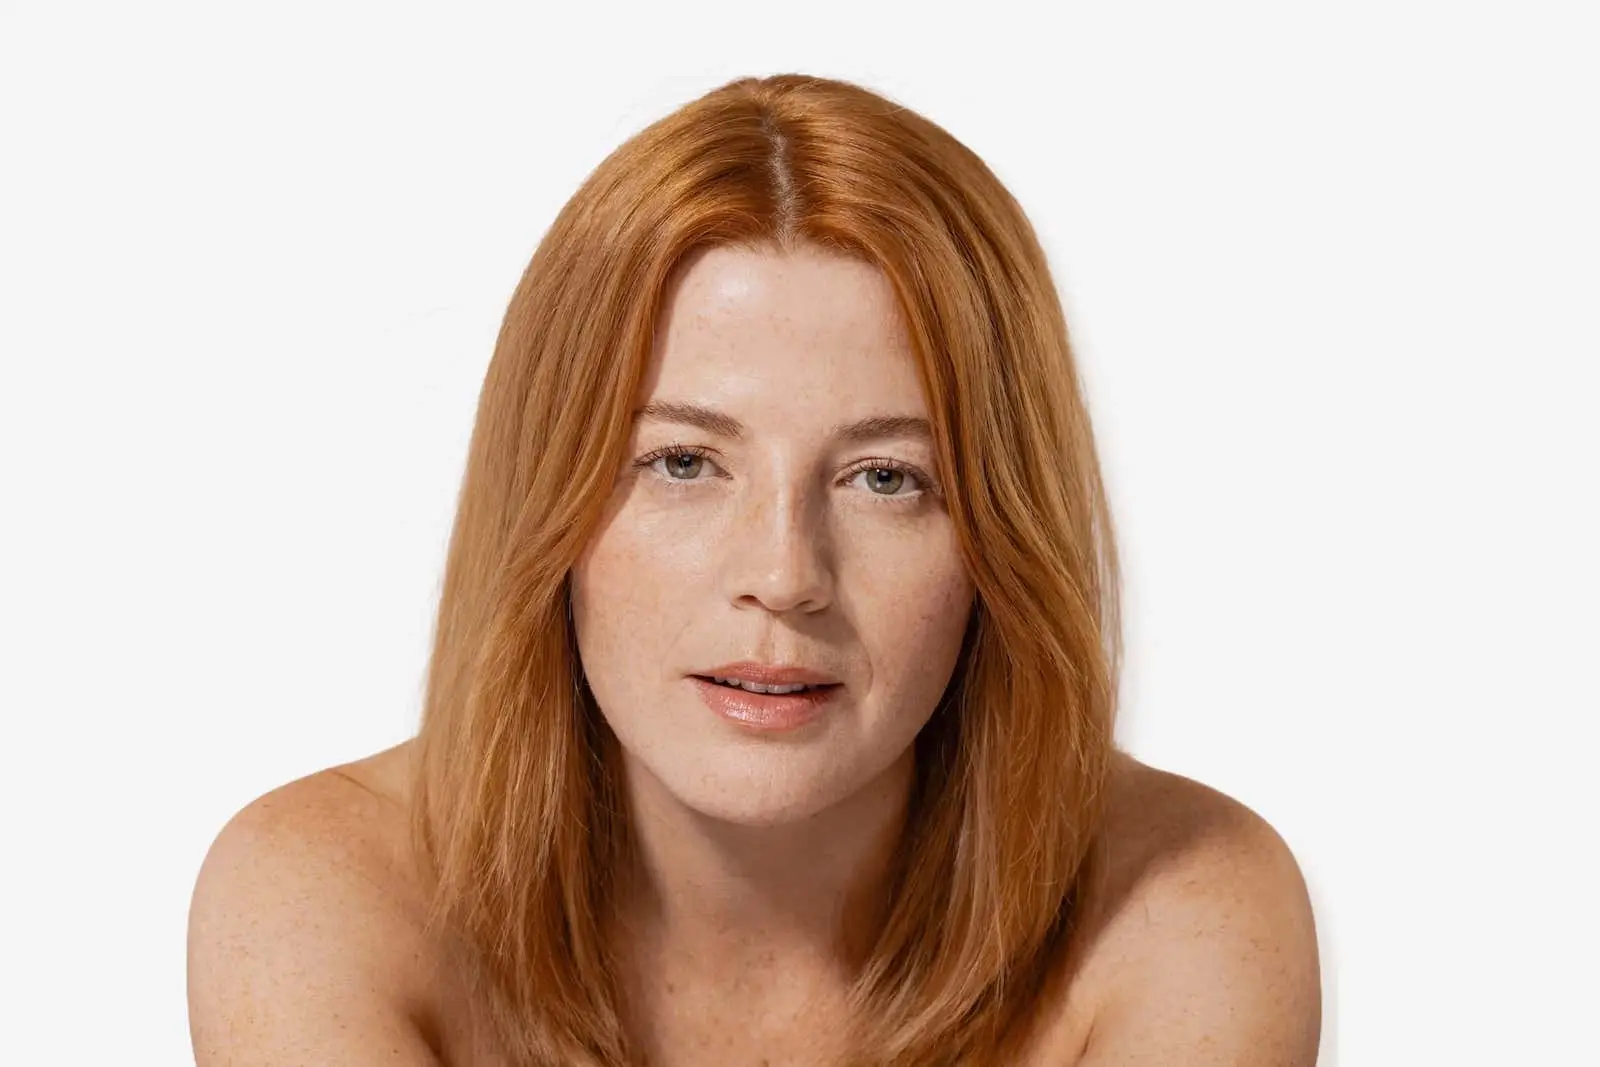 A close-up portrait of a woman with shoulder-length red hair and a subtle smile, showcasing her skincare routine results, posing against a white background